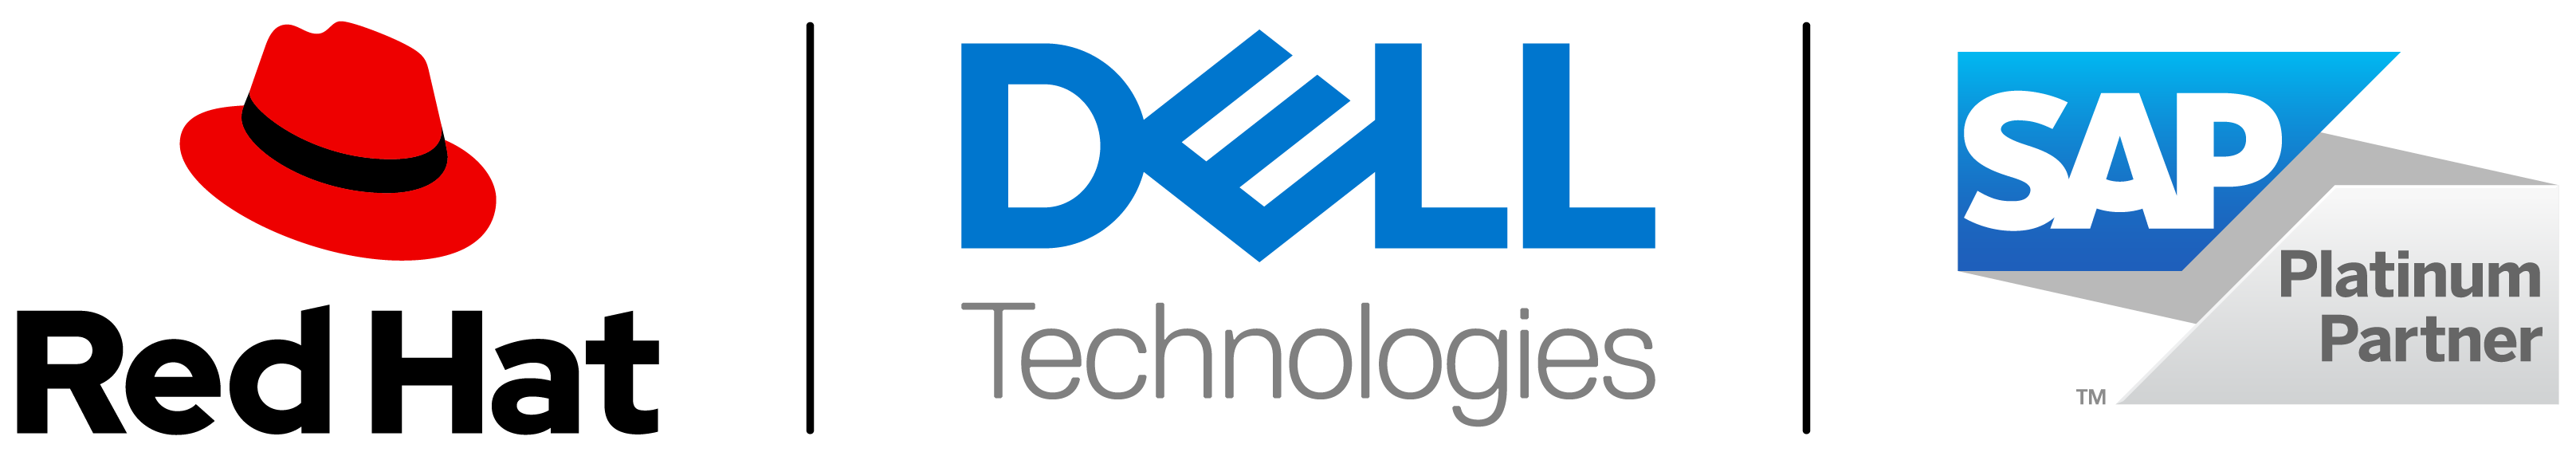 Red Hat | Dell Technologies | SAP logo